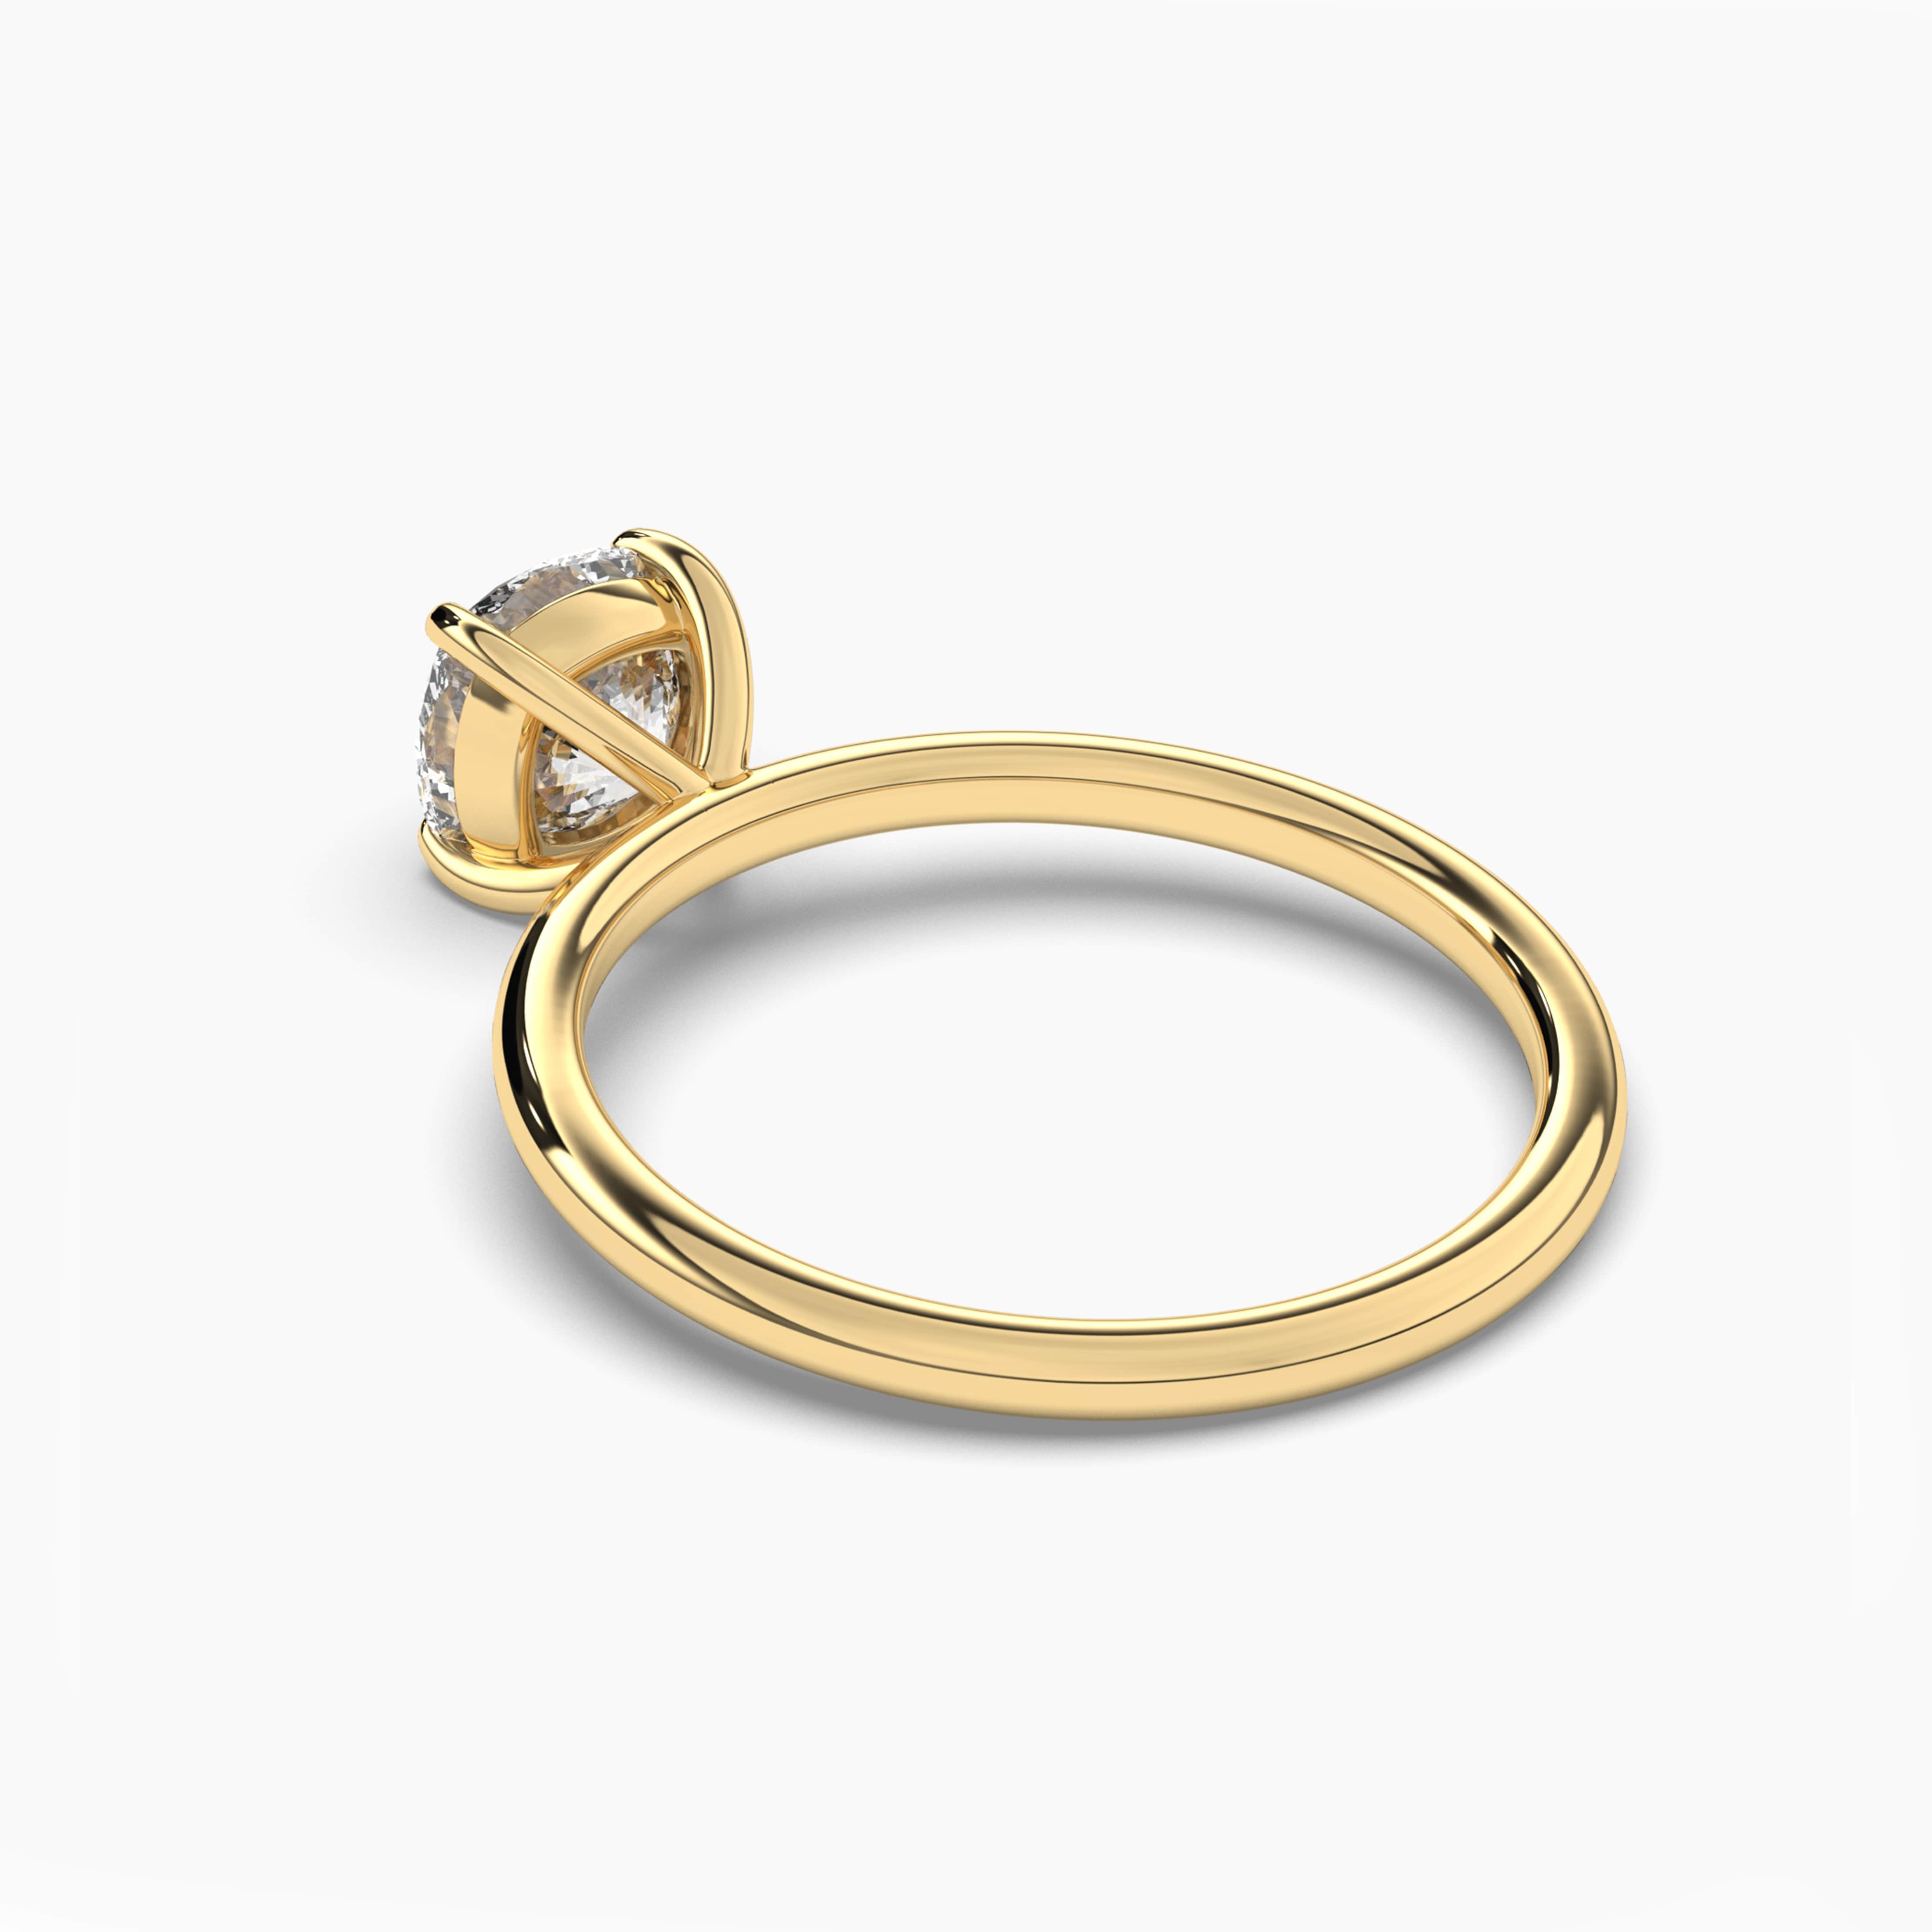 Cushion Cut Diamond Engagement Ring In Yellow Gold